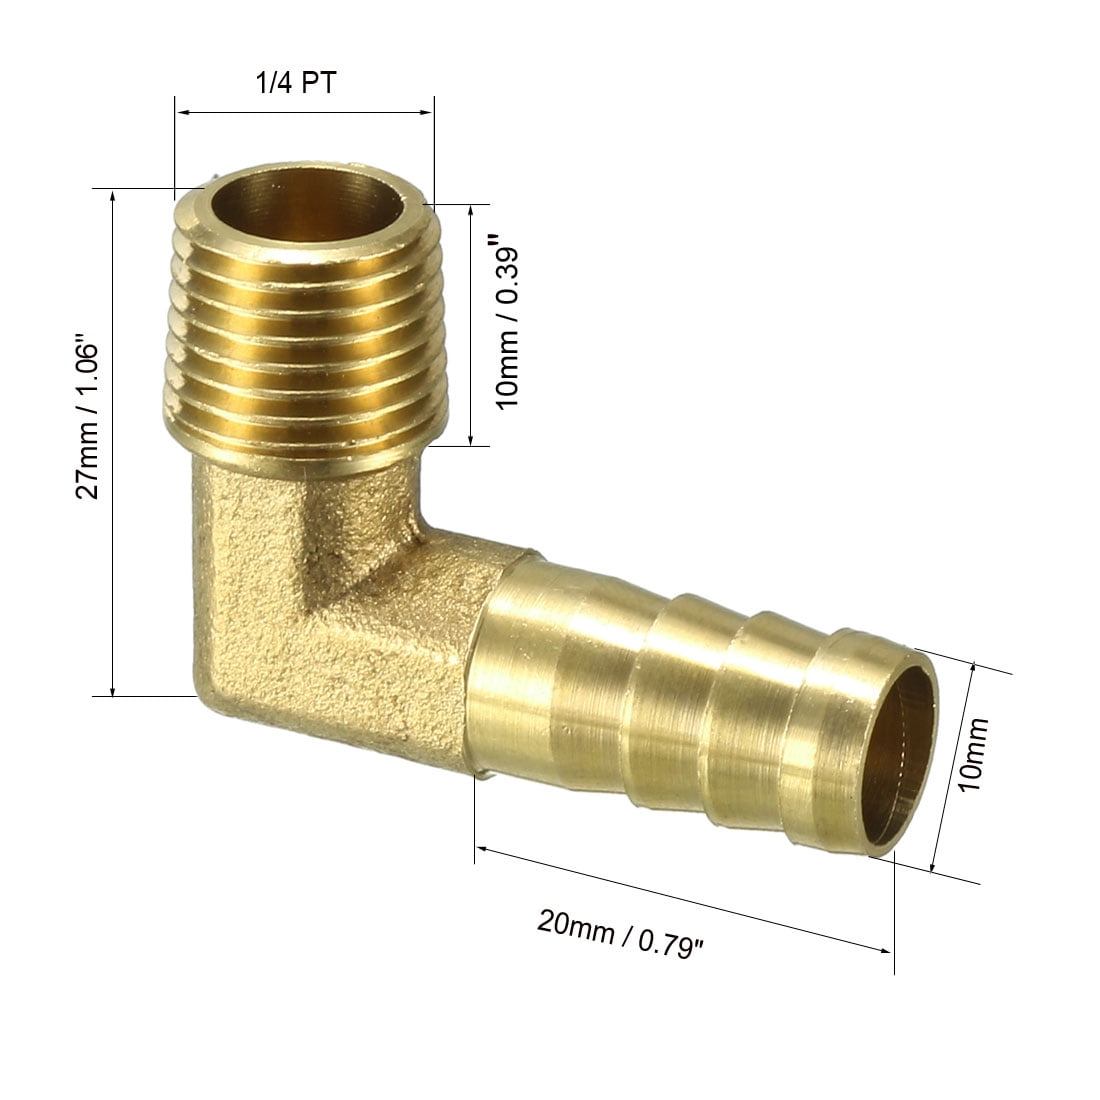 Brass Barb Hose Fitting 90 Degree Elbow 6mm Barbed x 1/4 PT Male Pipe 5pcs 